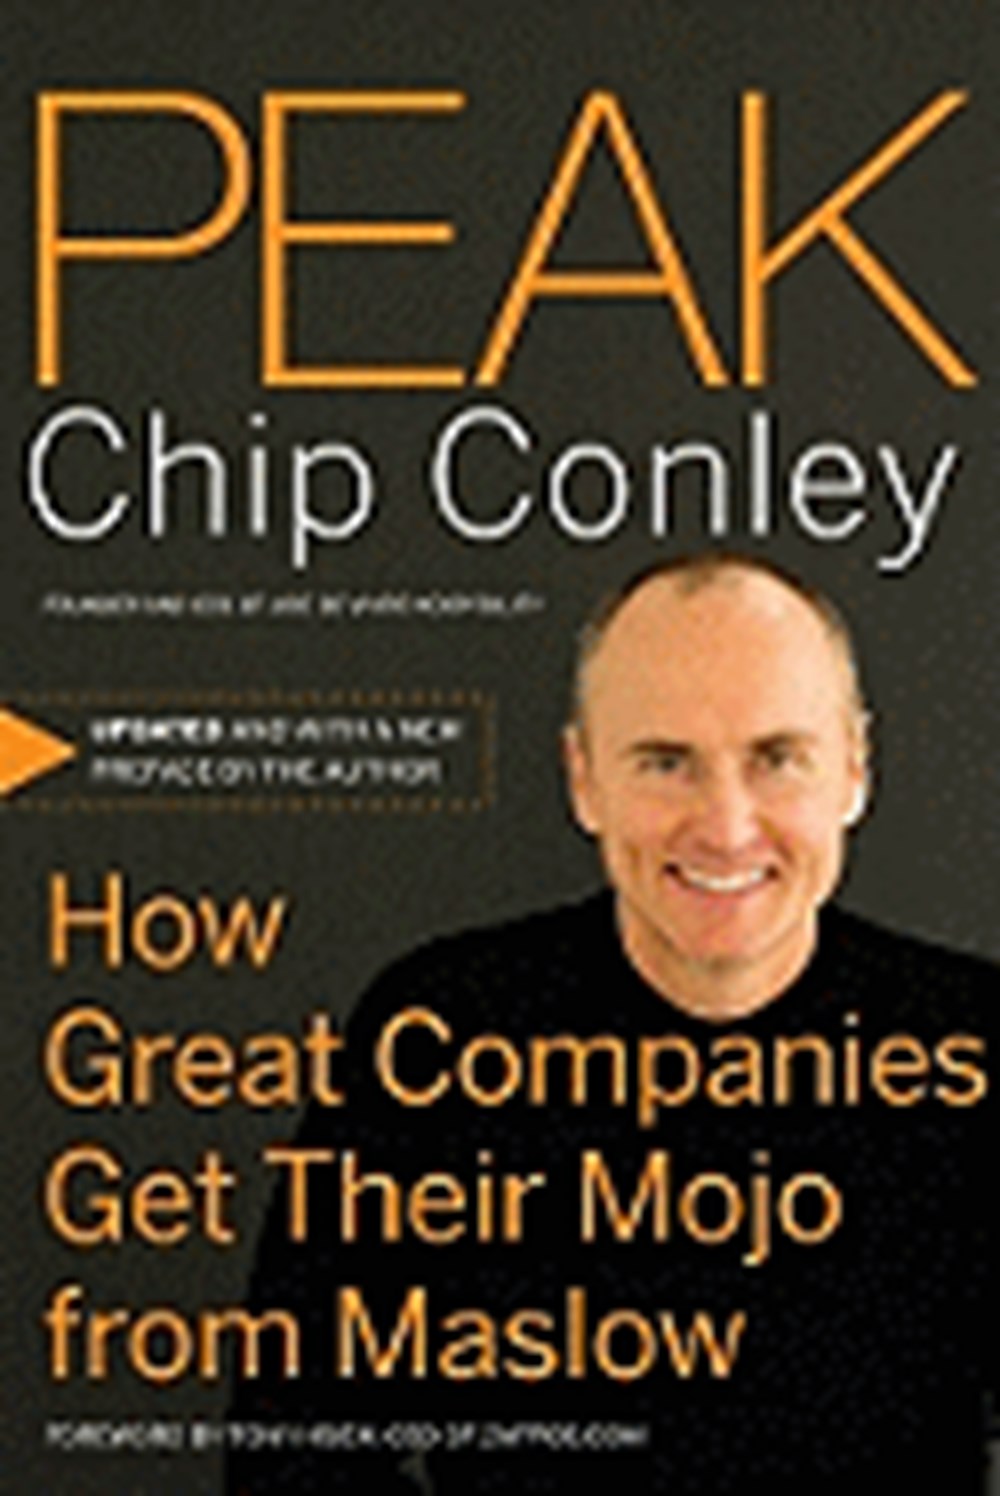 Peak: How Great Companies Get Their Mojo from Maslow (Revised, Updated)